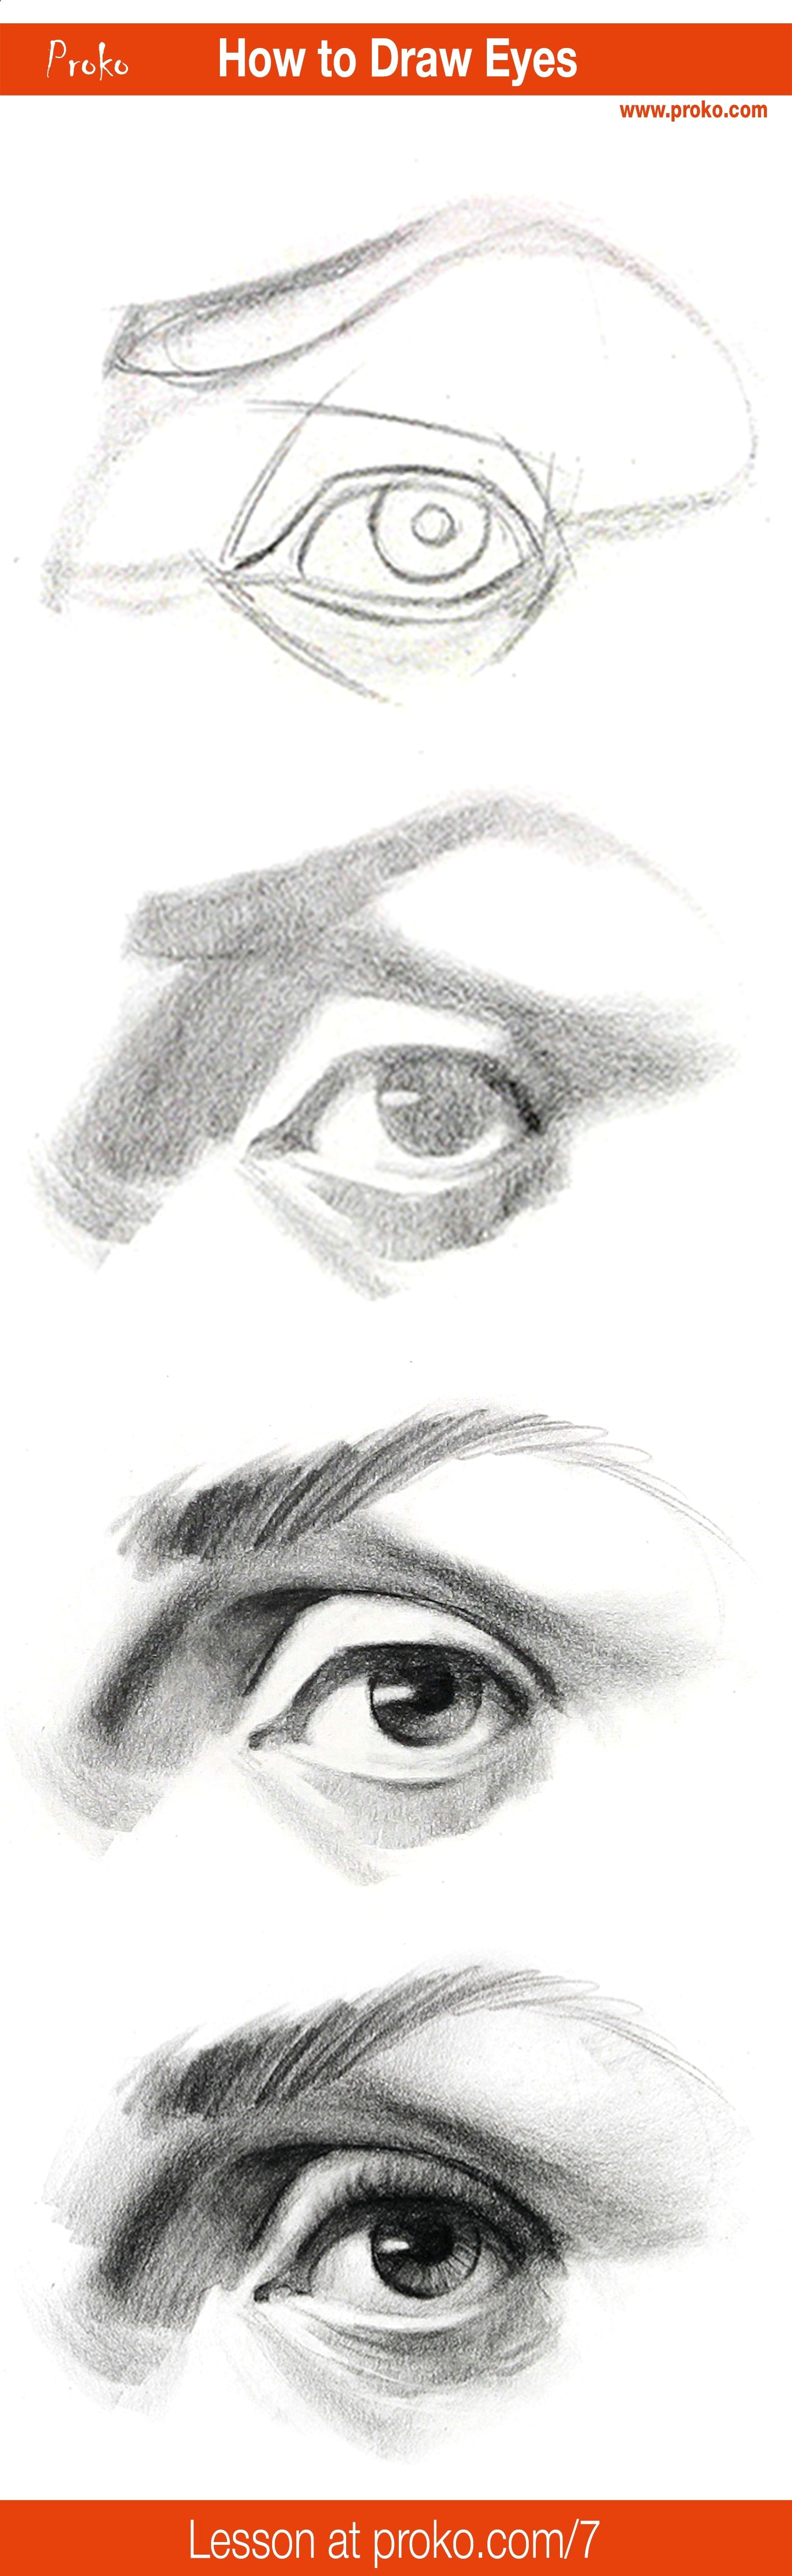 Drawing Eyes Proko Drawing Pencil Portraits Draw Realistic Eyes with This Step by